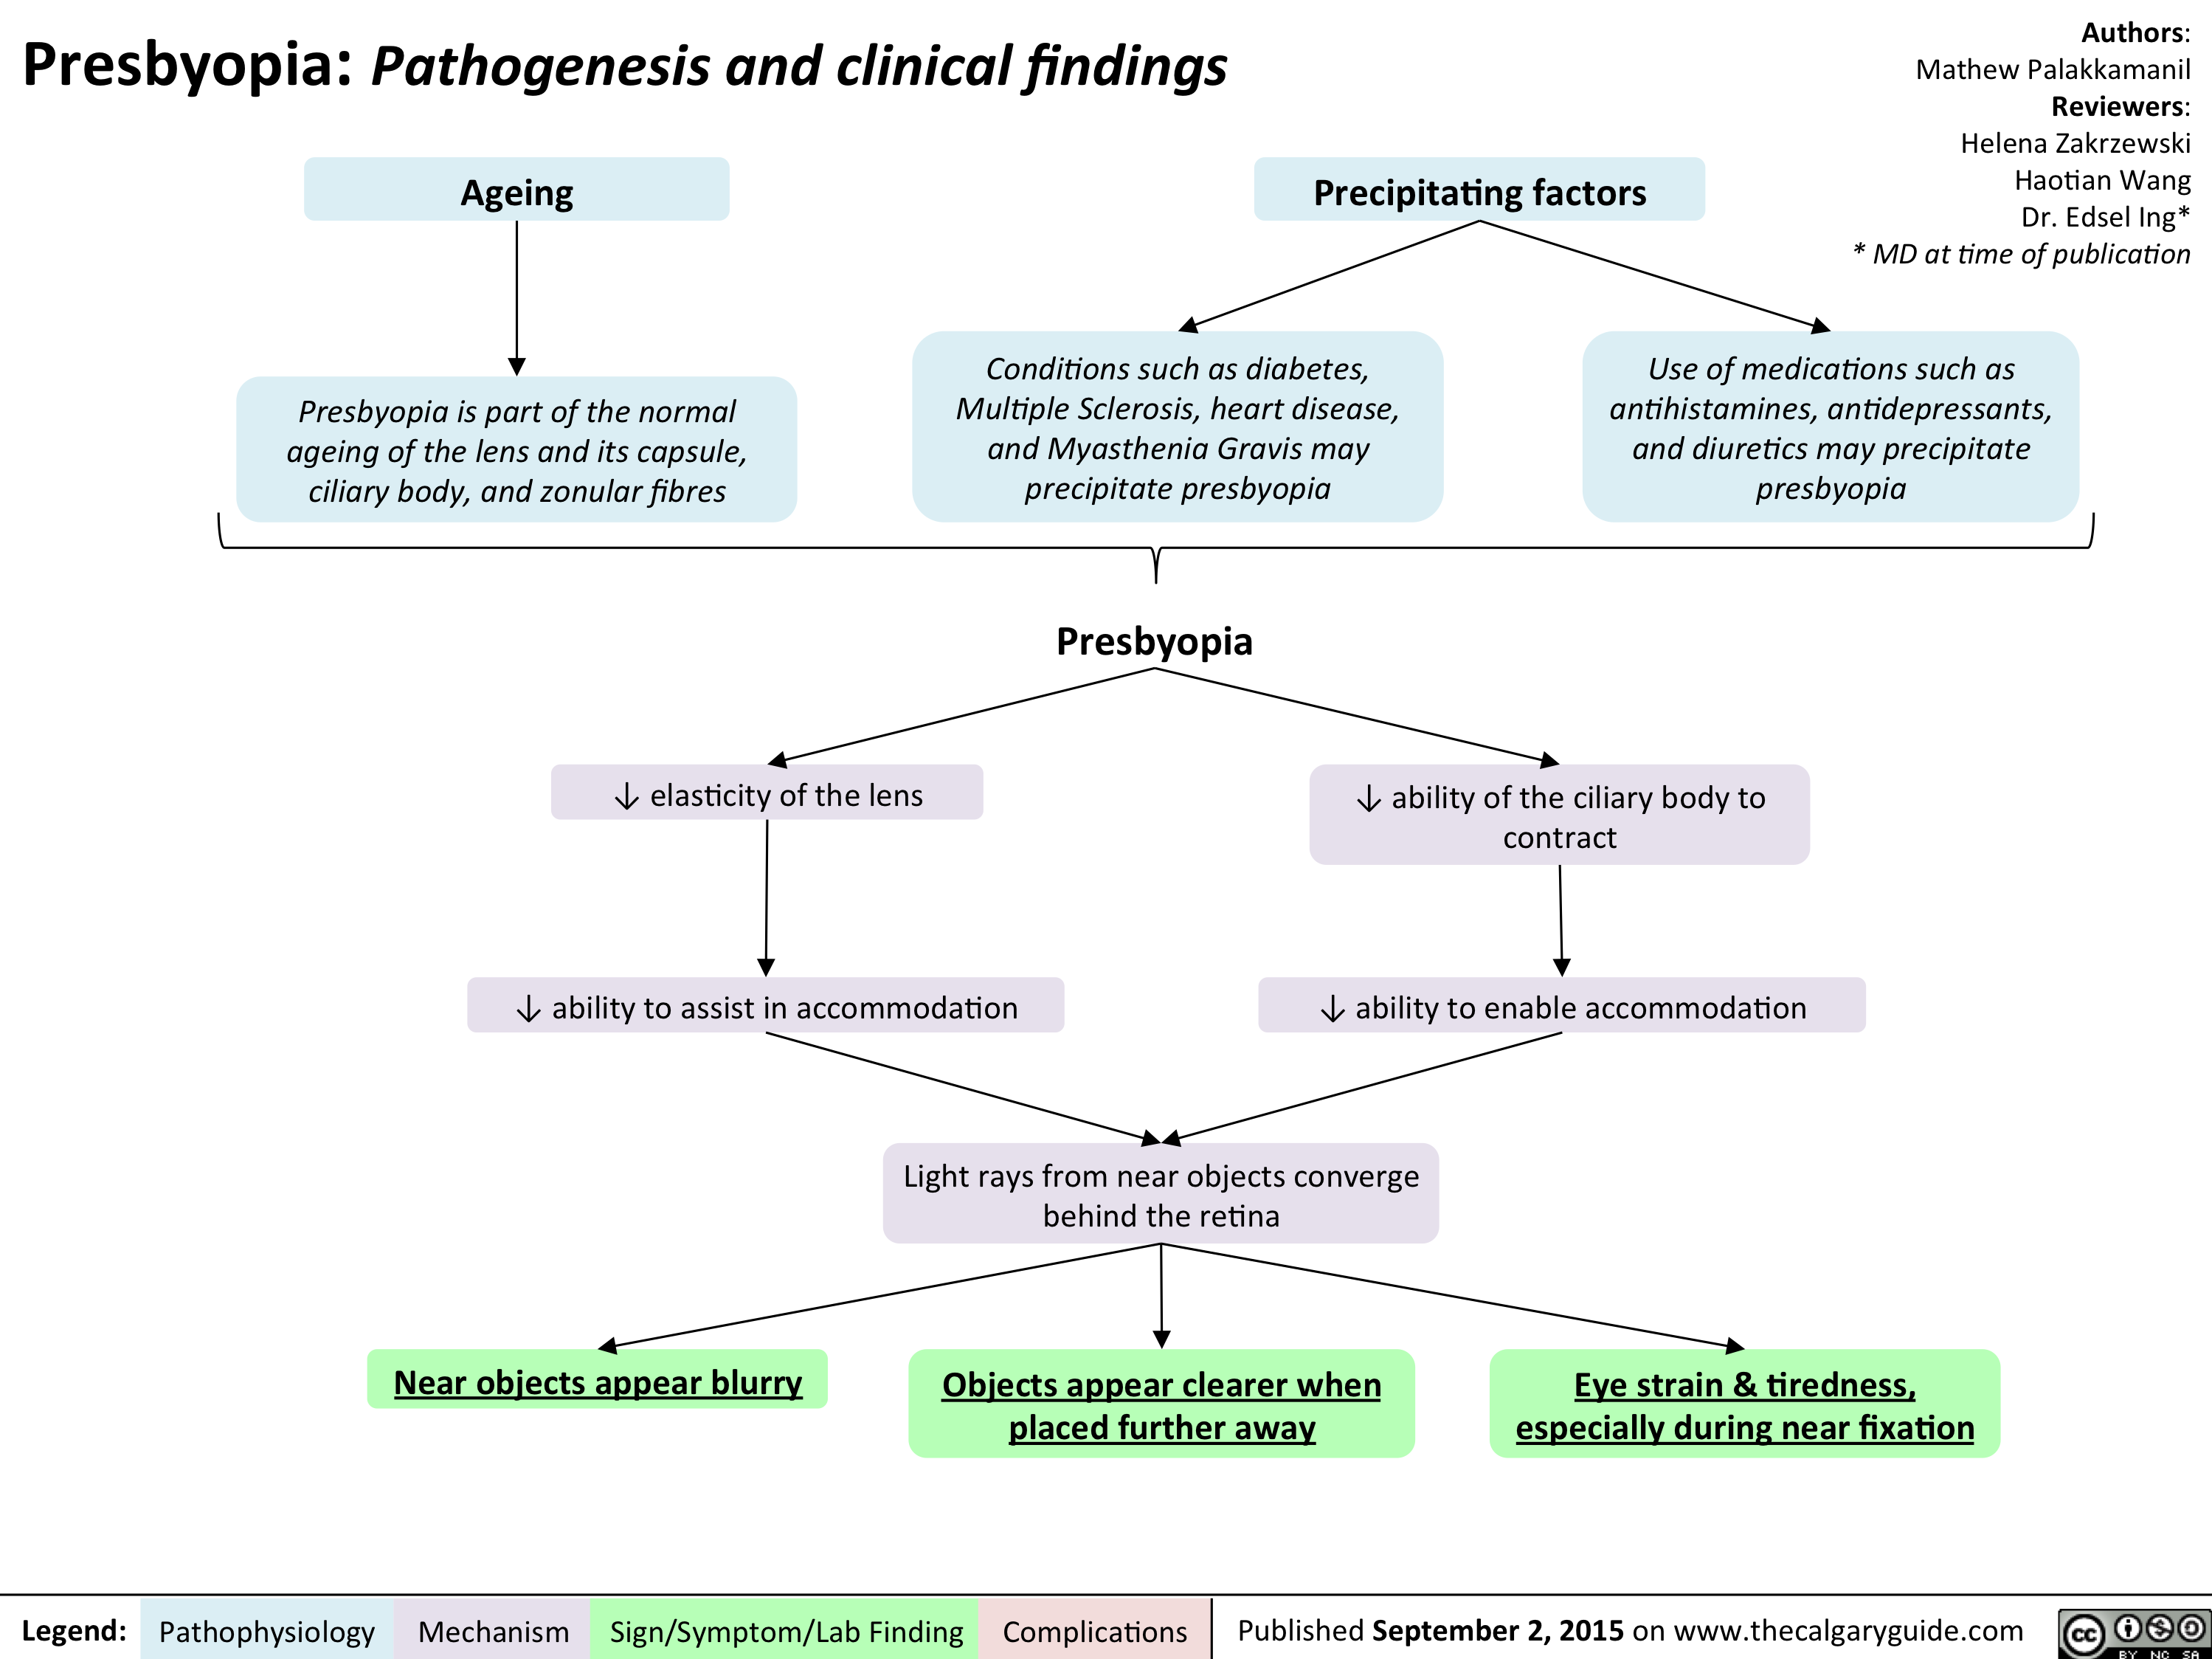 Presbyopia - Pathogenesis and clinical findings